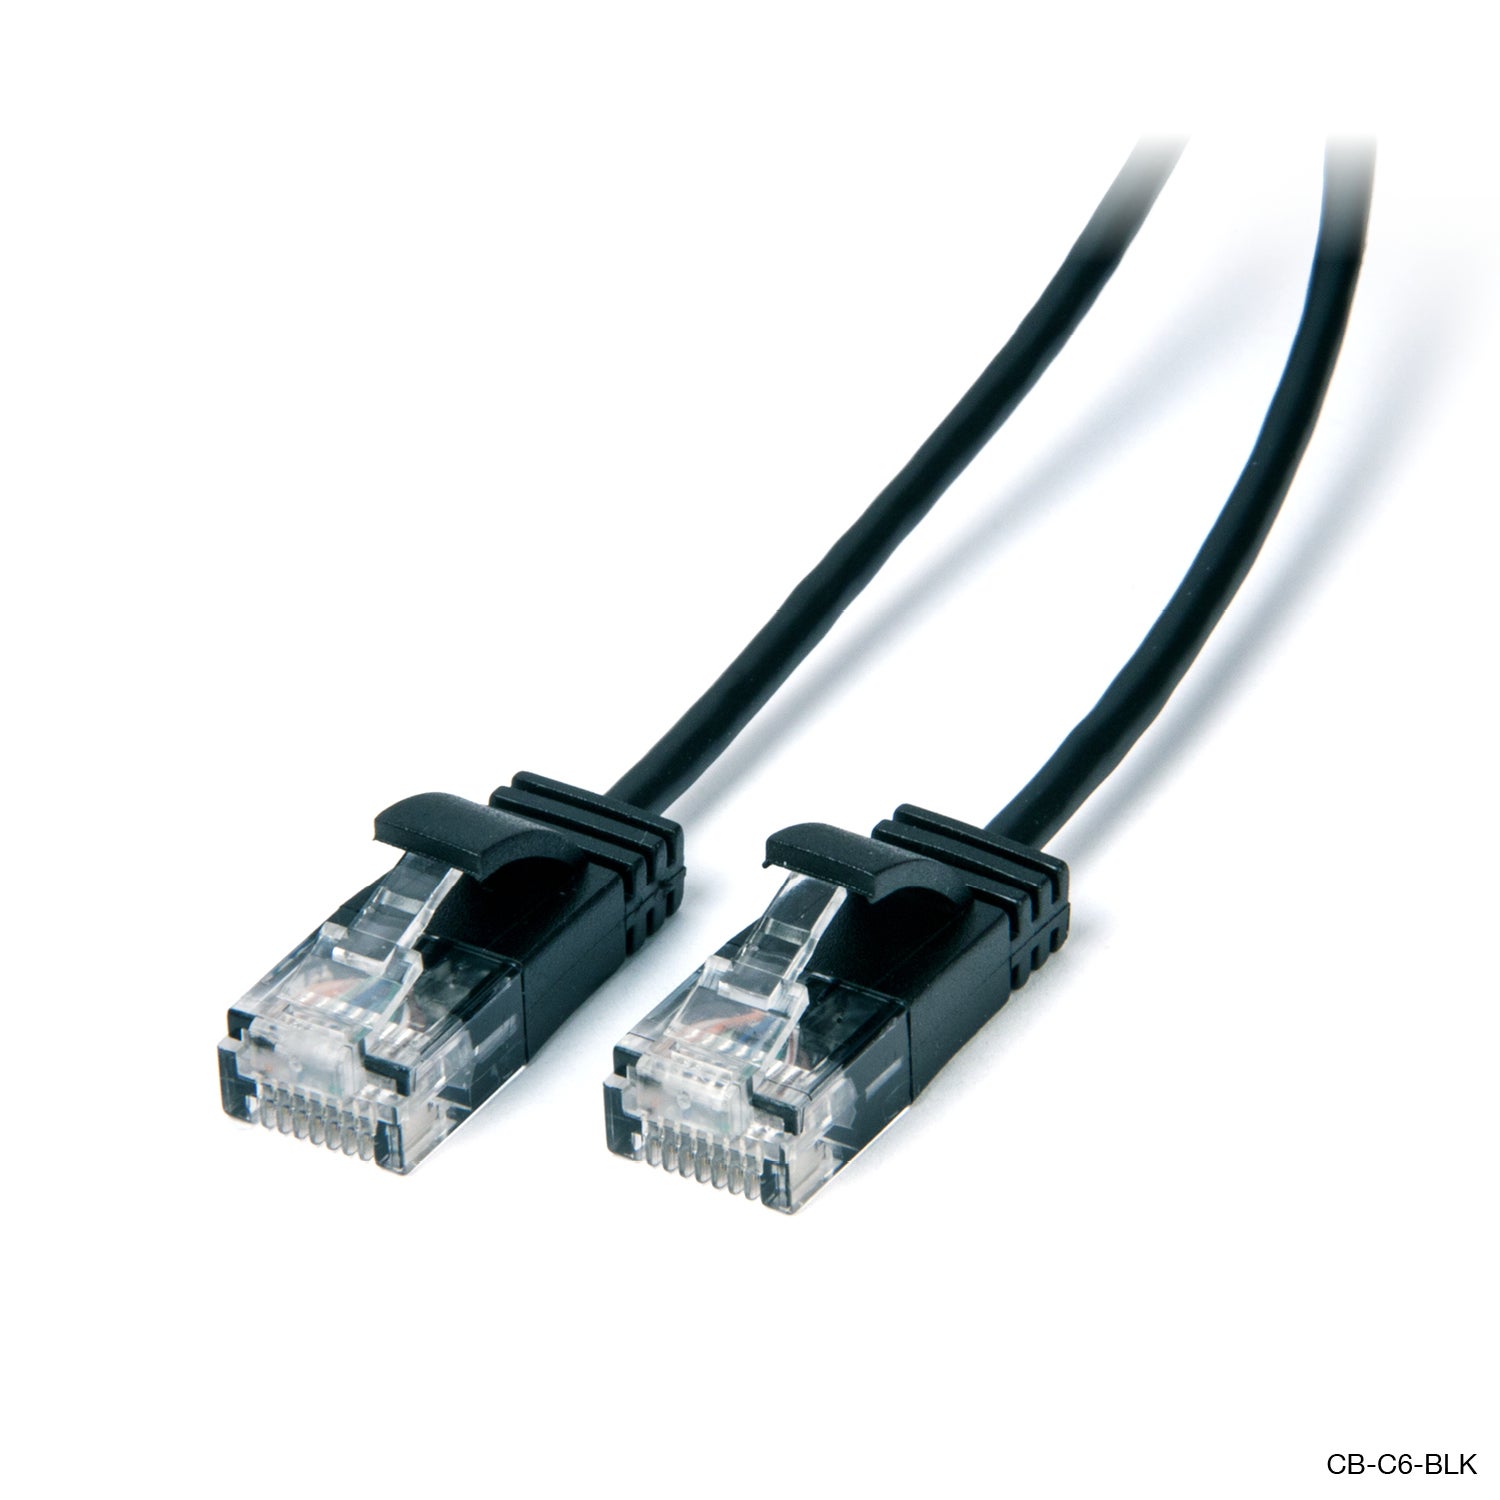 Ultra Slim Cat6 Network Cable Black 5M